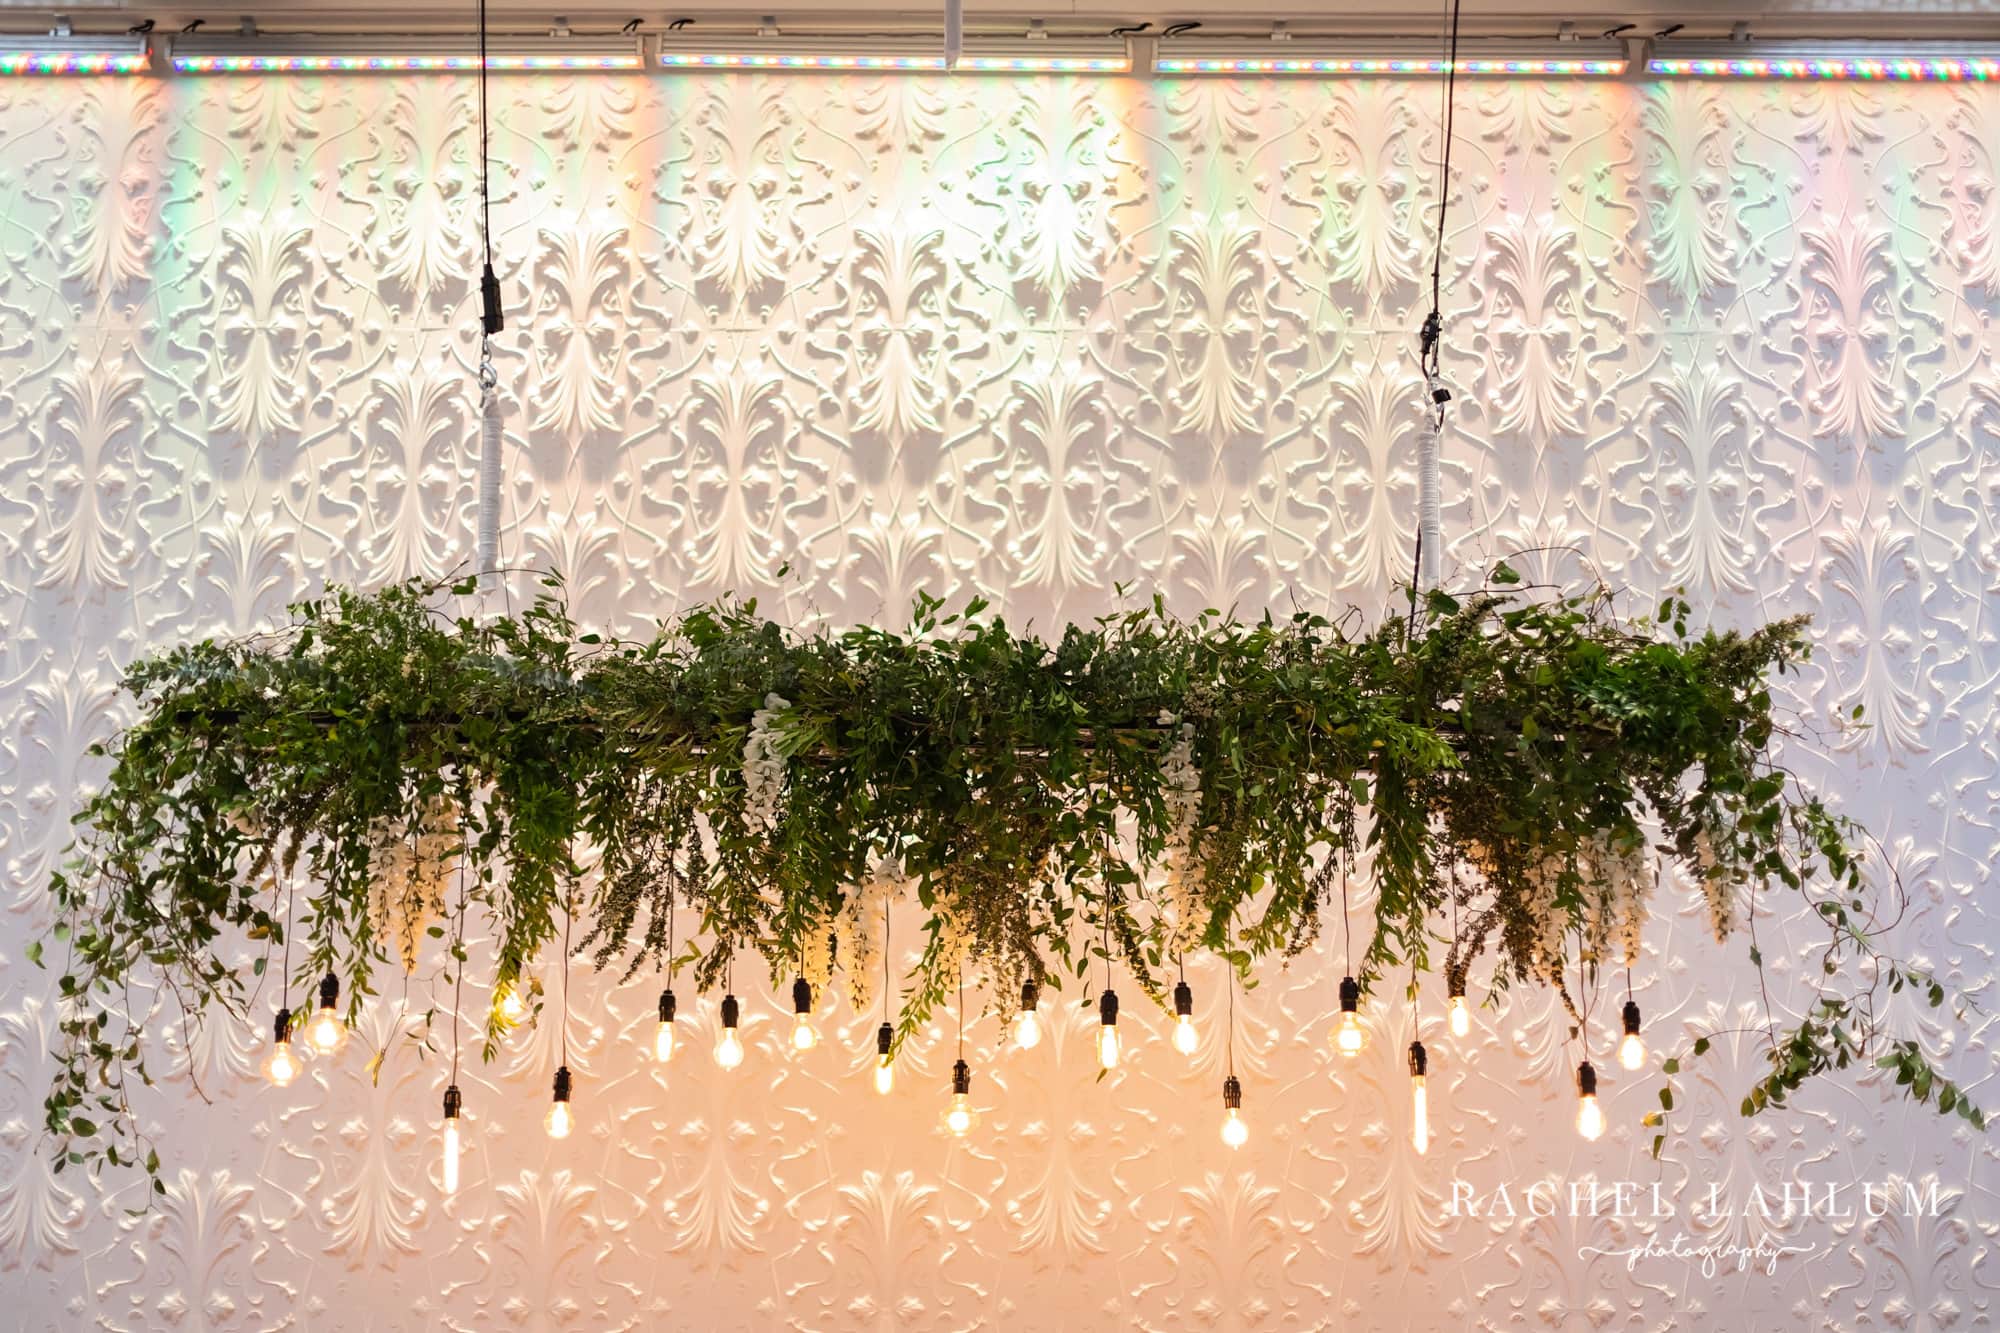 Hanging greenery and lights decoration above the reception space at The Blaisdell.